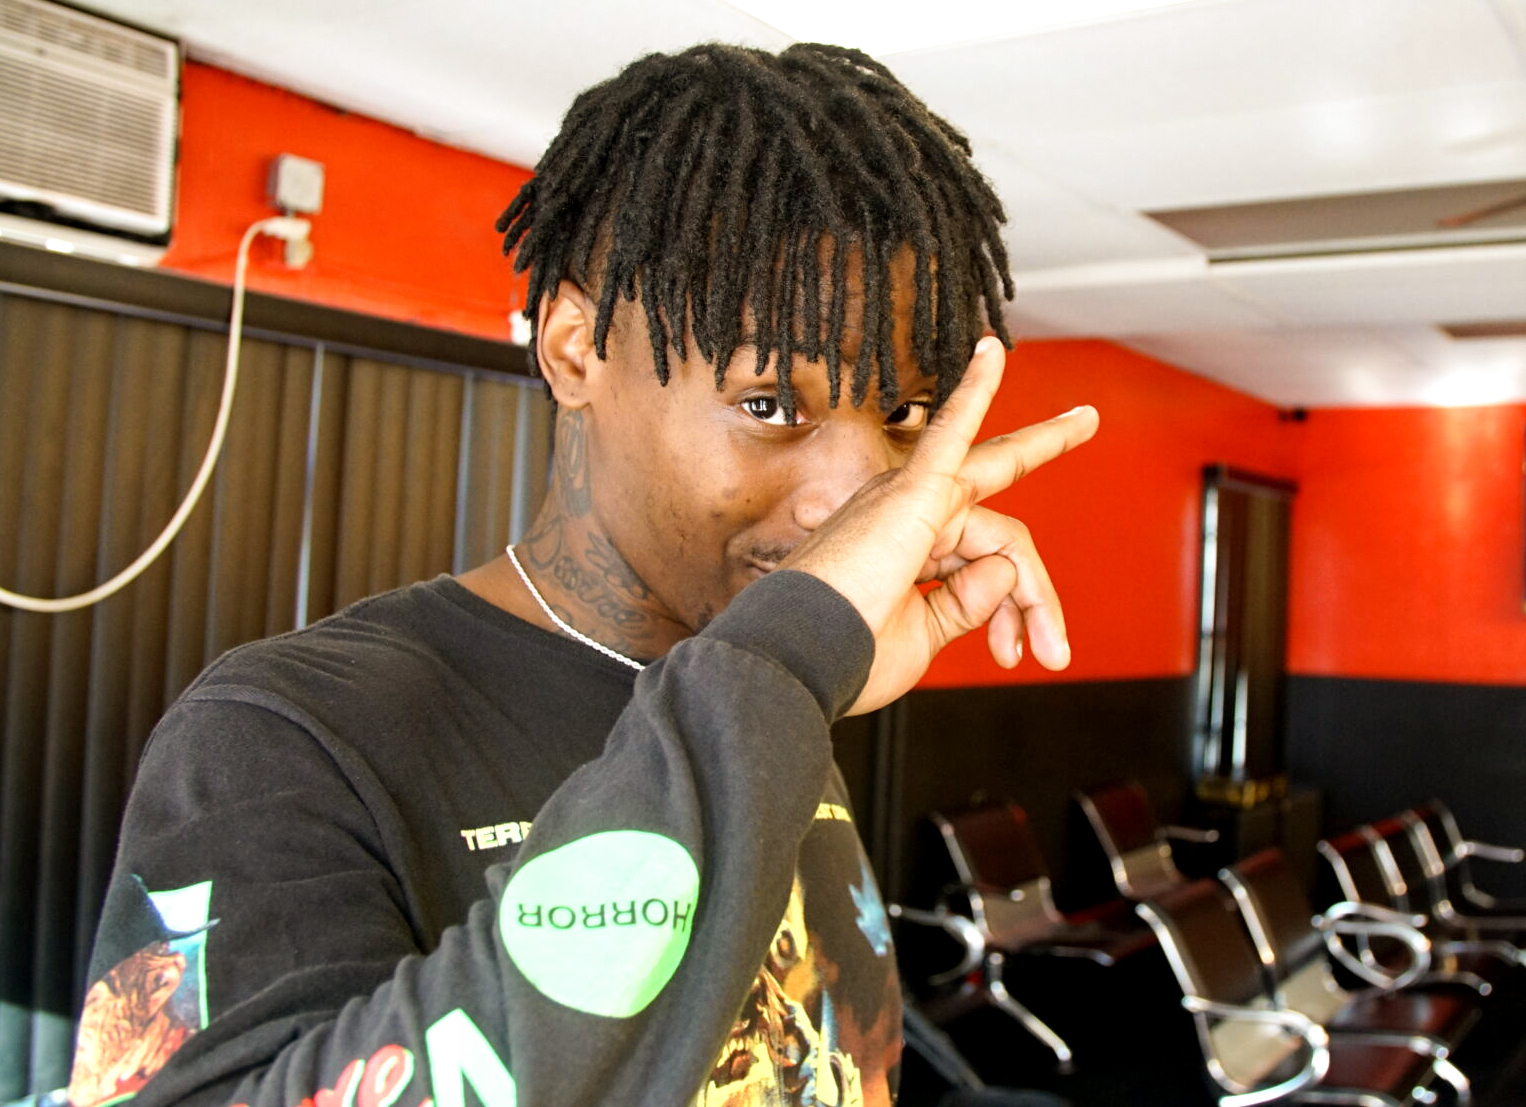 Person with dark skin and short locs gestures in front of their face and looks at camera, with interior of barber shop in background.